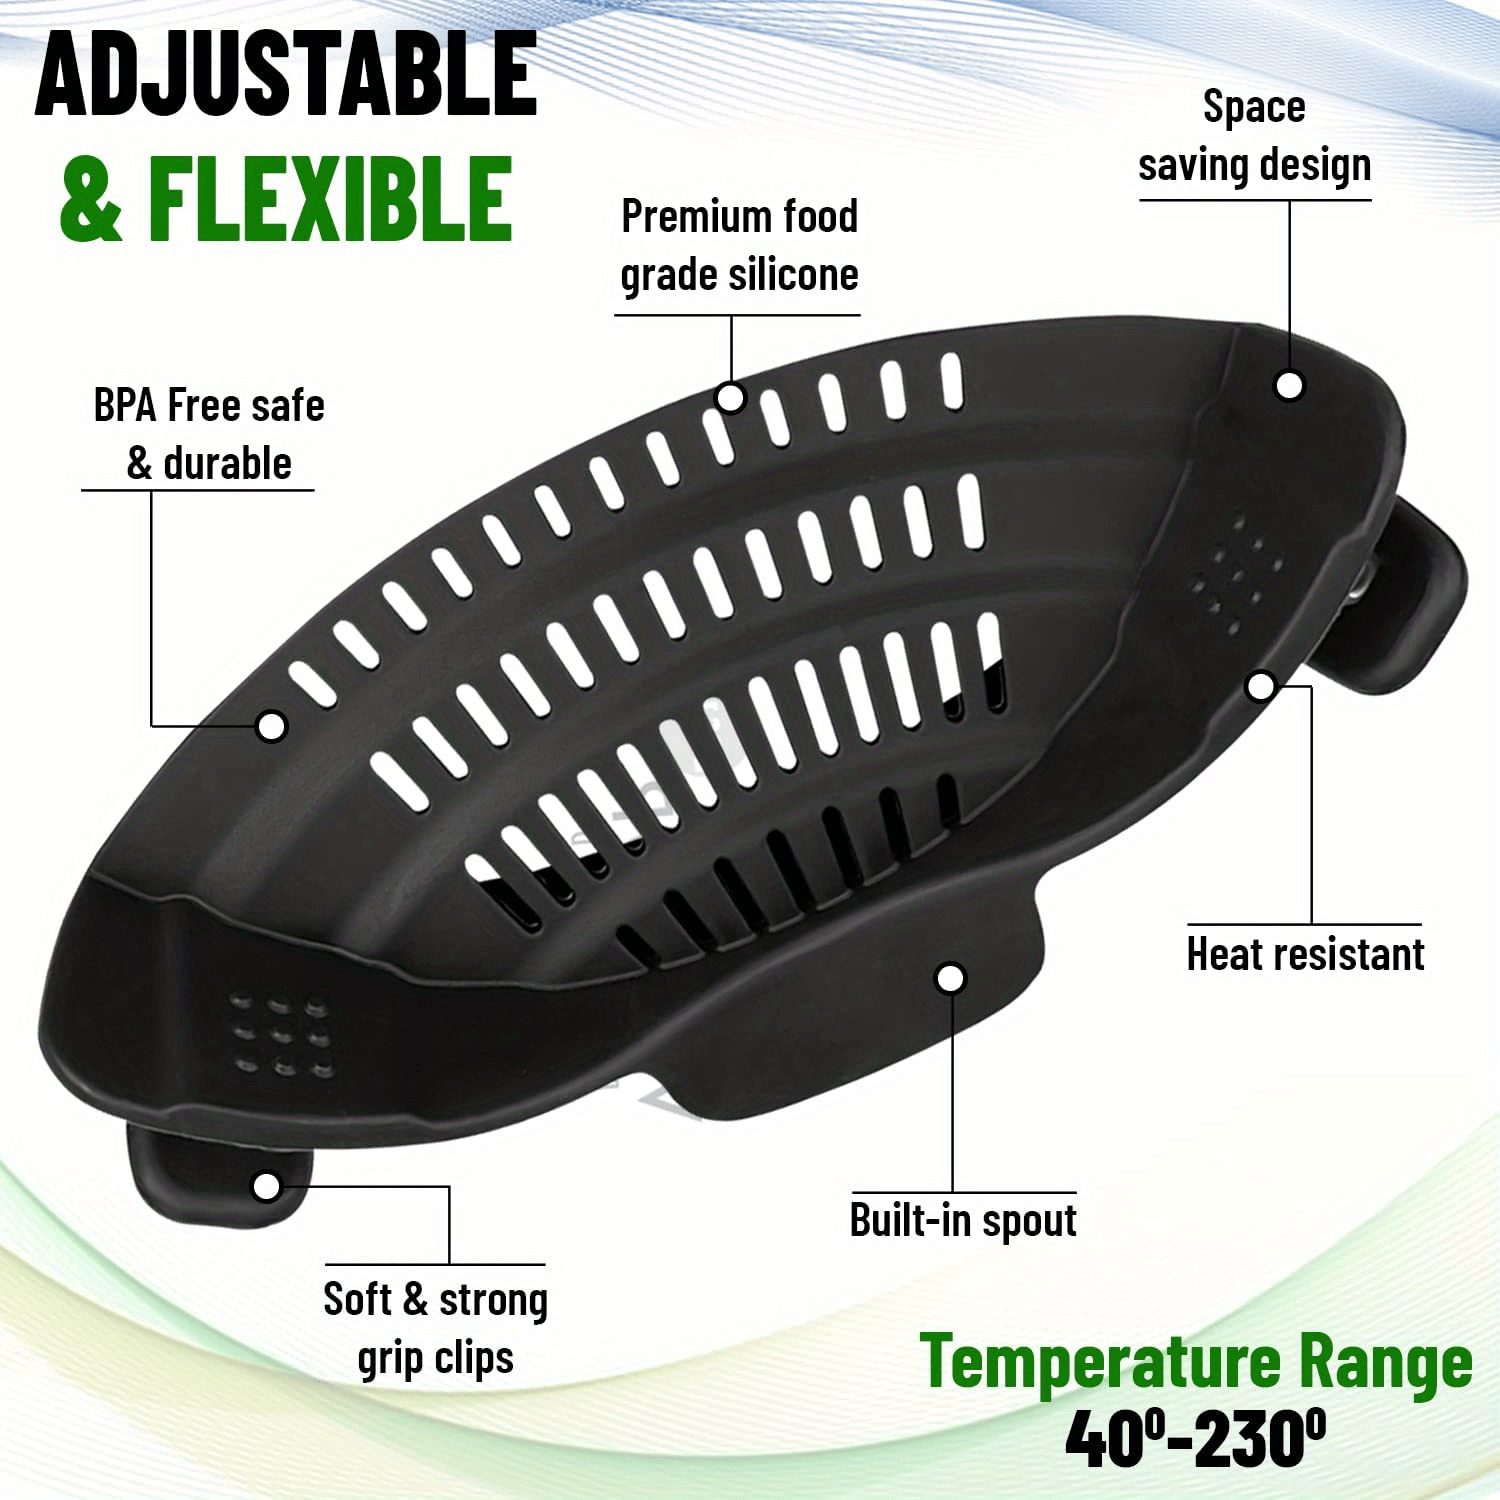 Every chef needs this adjustable silicone clip-on strainer for pots, p –